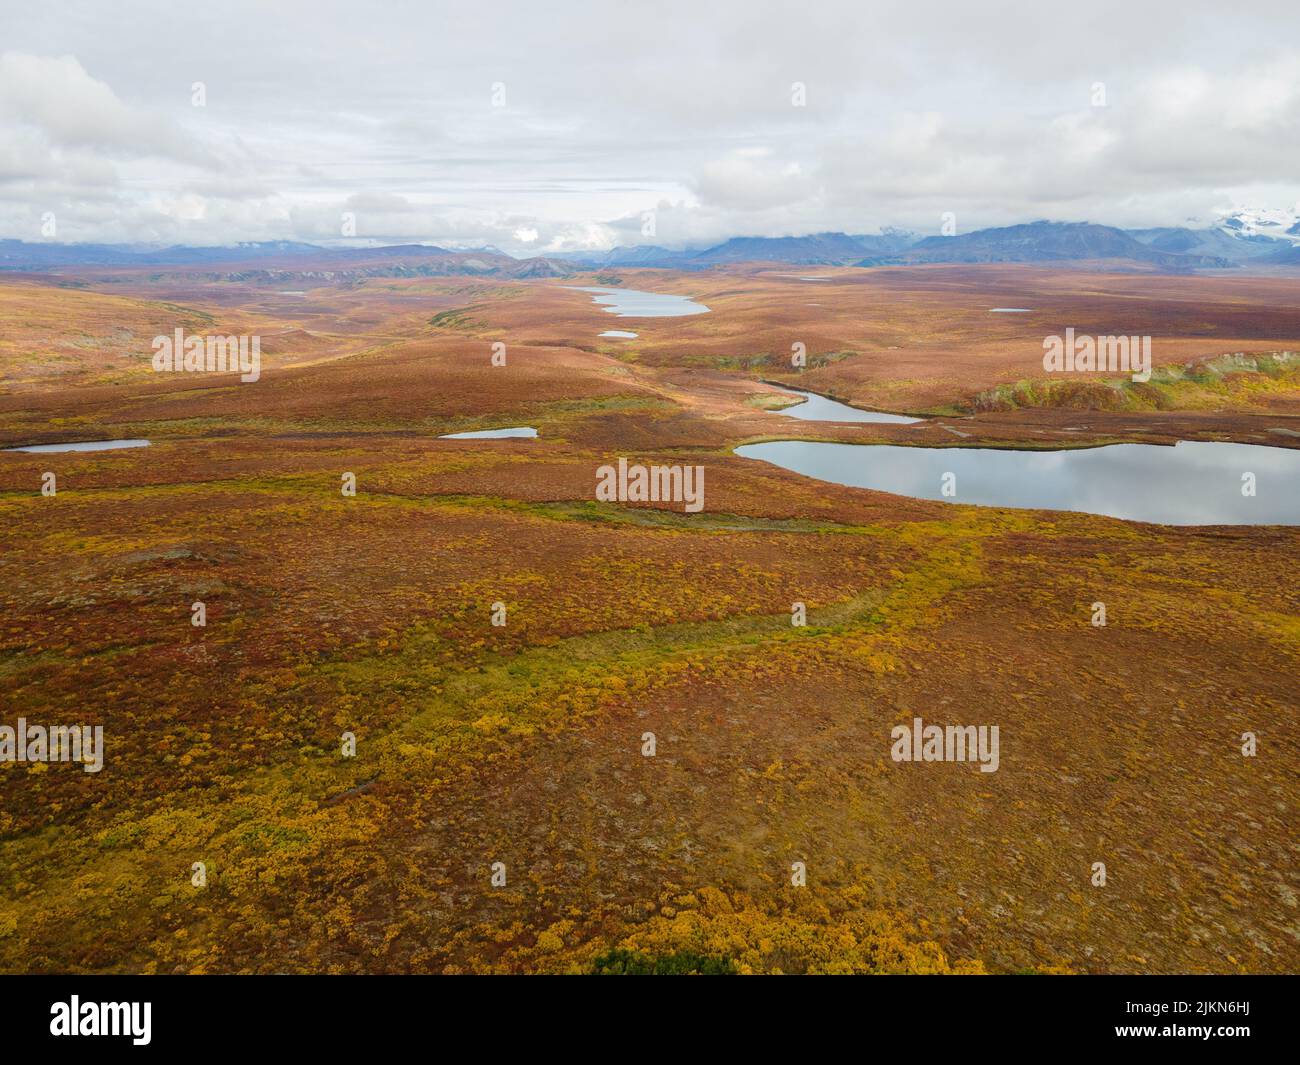 A view of small lakes with Alaska Range in autumn colors in the background, Alaska, USA Stock Photo